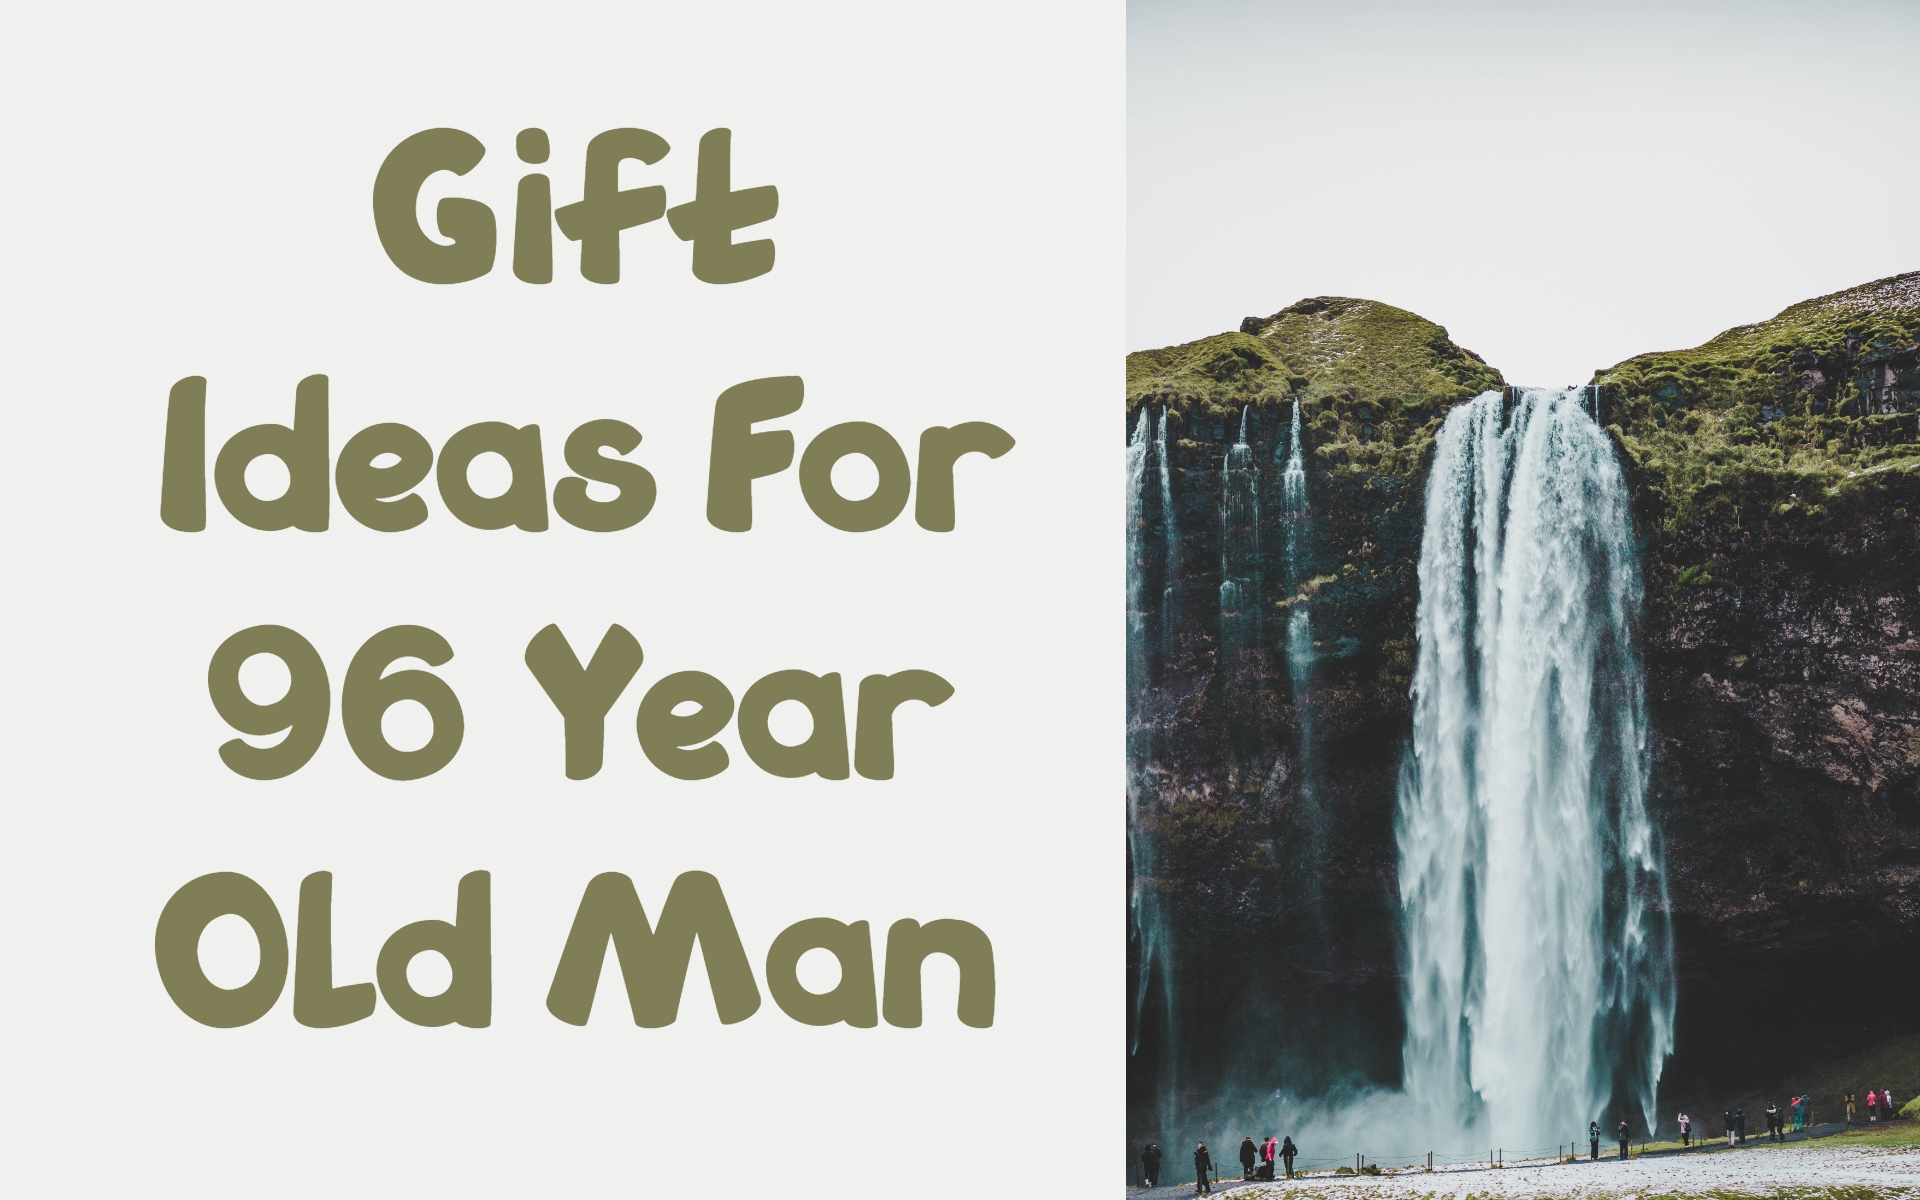 Cover image of gift ideas for 96-year-old man by Giftsedge